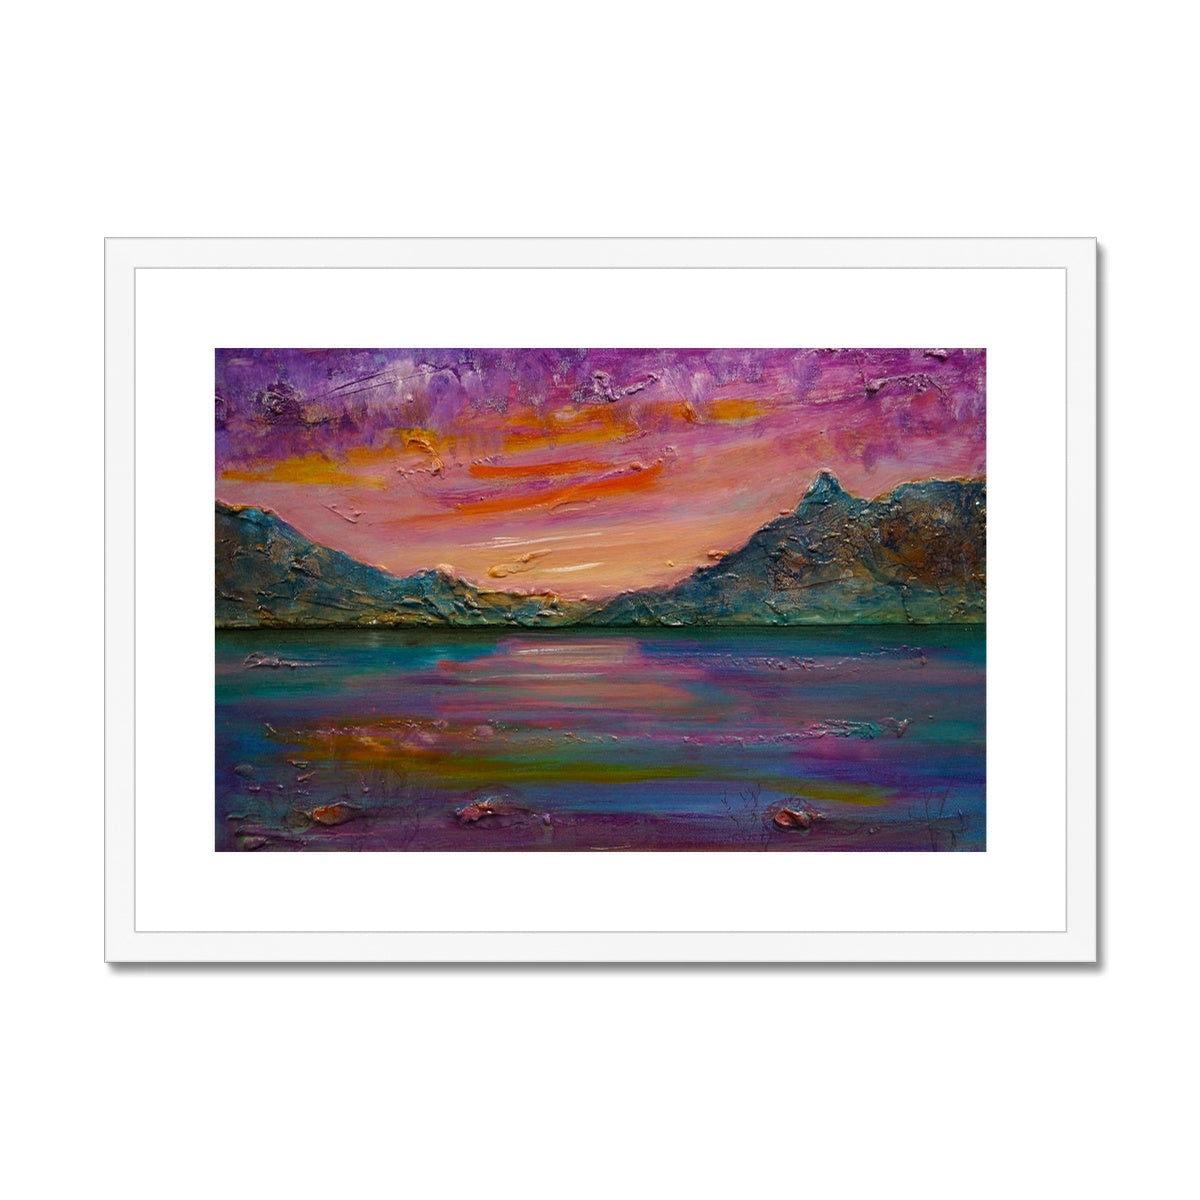 Loch Leven Sunset Painting | Framed & Mounted Prints From Scotland-Framed & Mounted Prints-Scottish Lochs & Mountains Art Gallery-A2 Landscape-White Frame-Paintings, Prints, Homeware, Art Gifts From Scotland By Scottish Artist Kevin Hunter